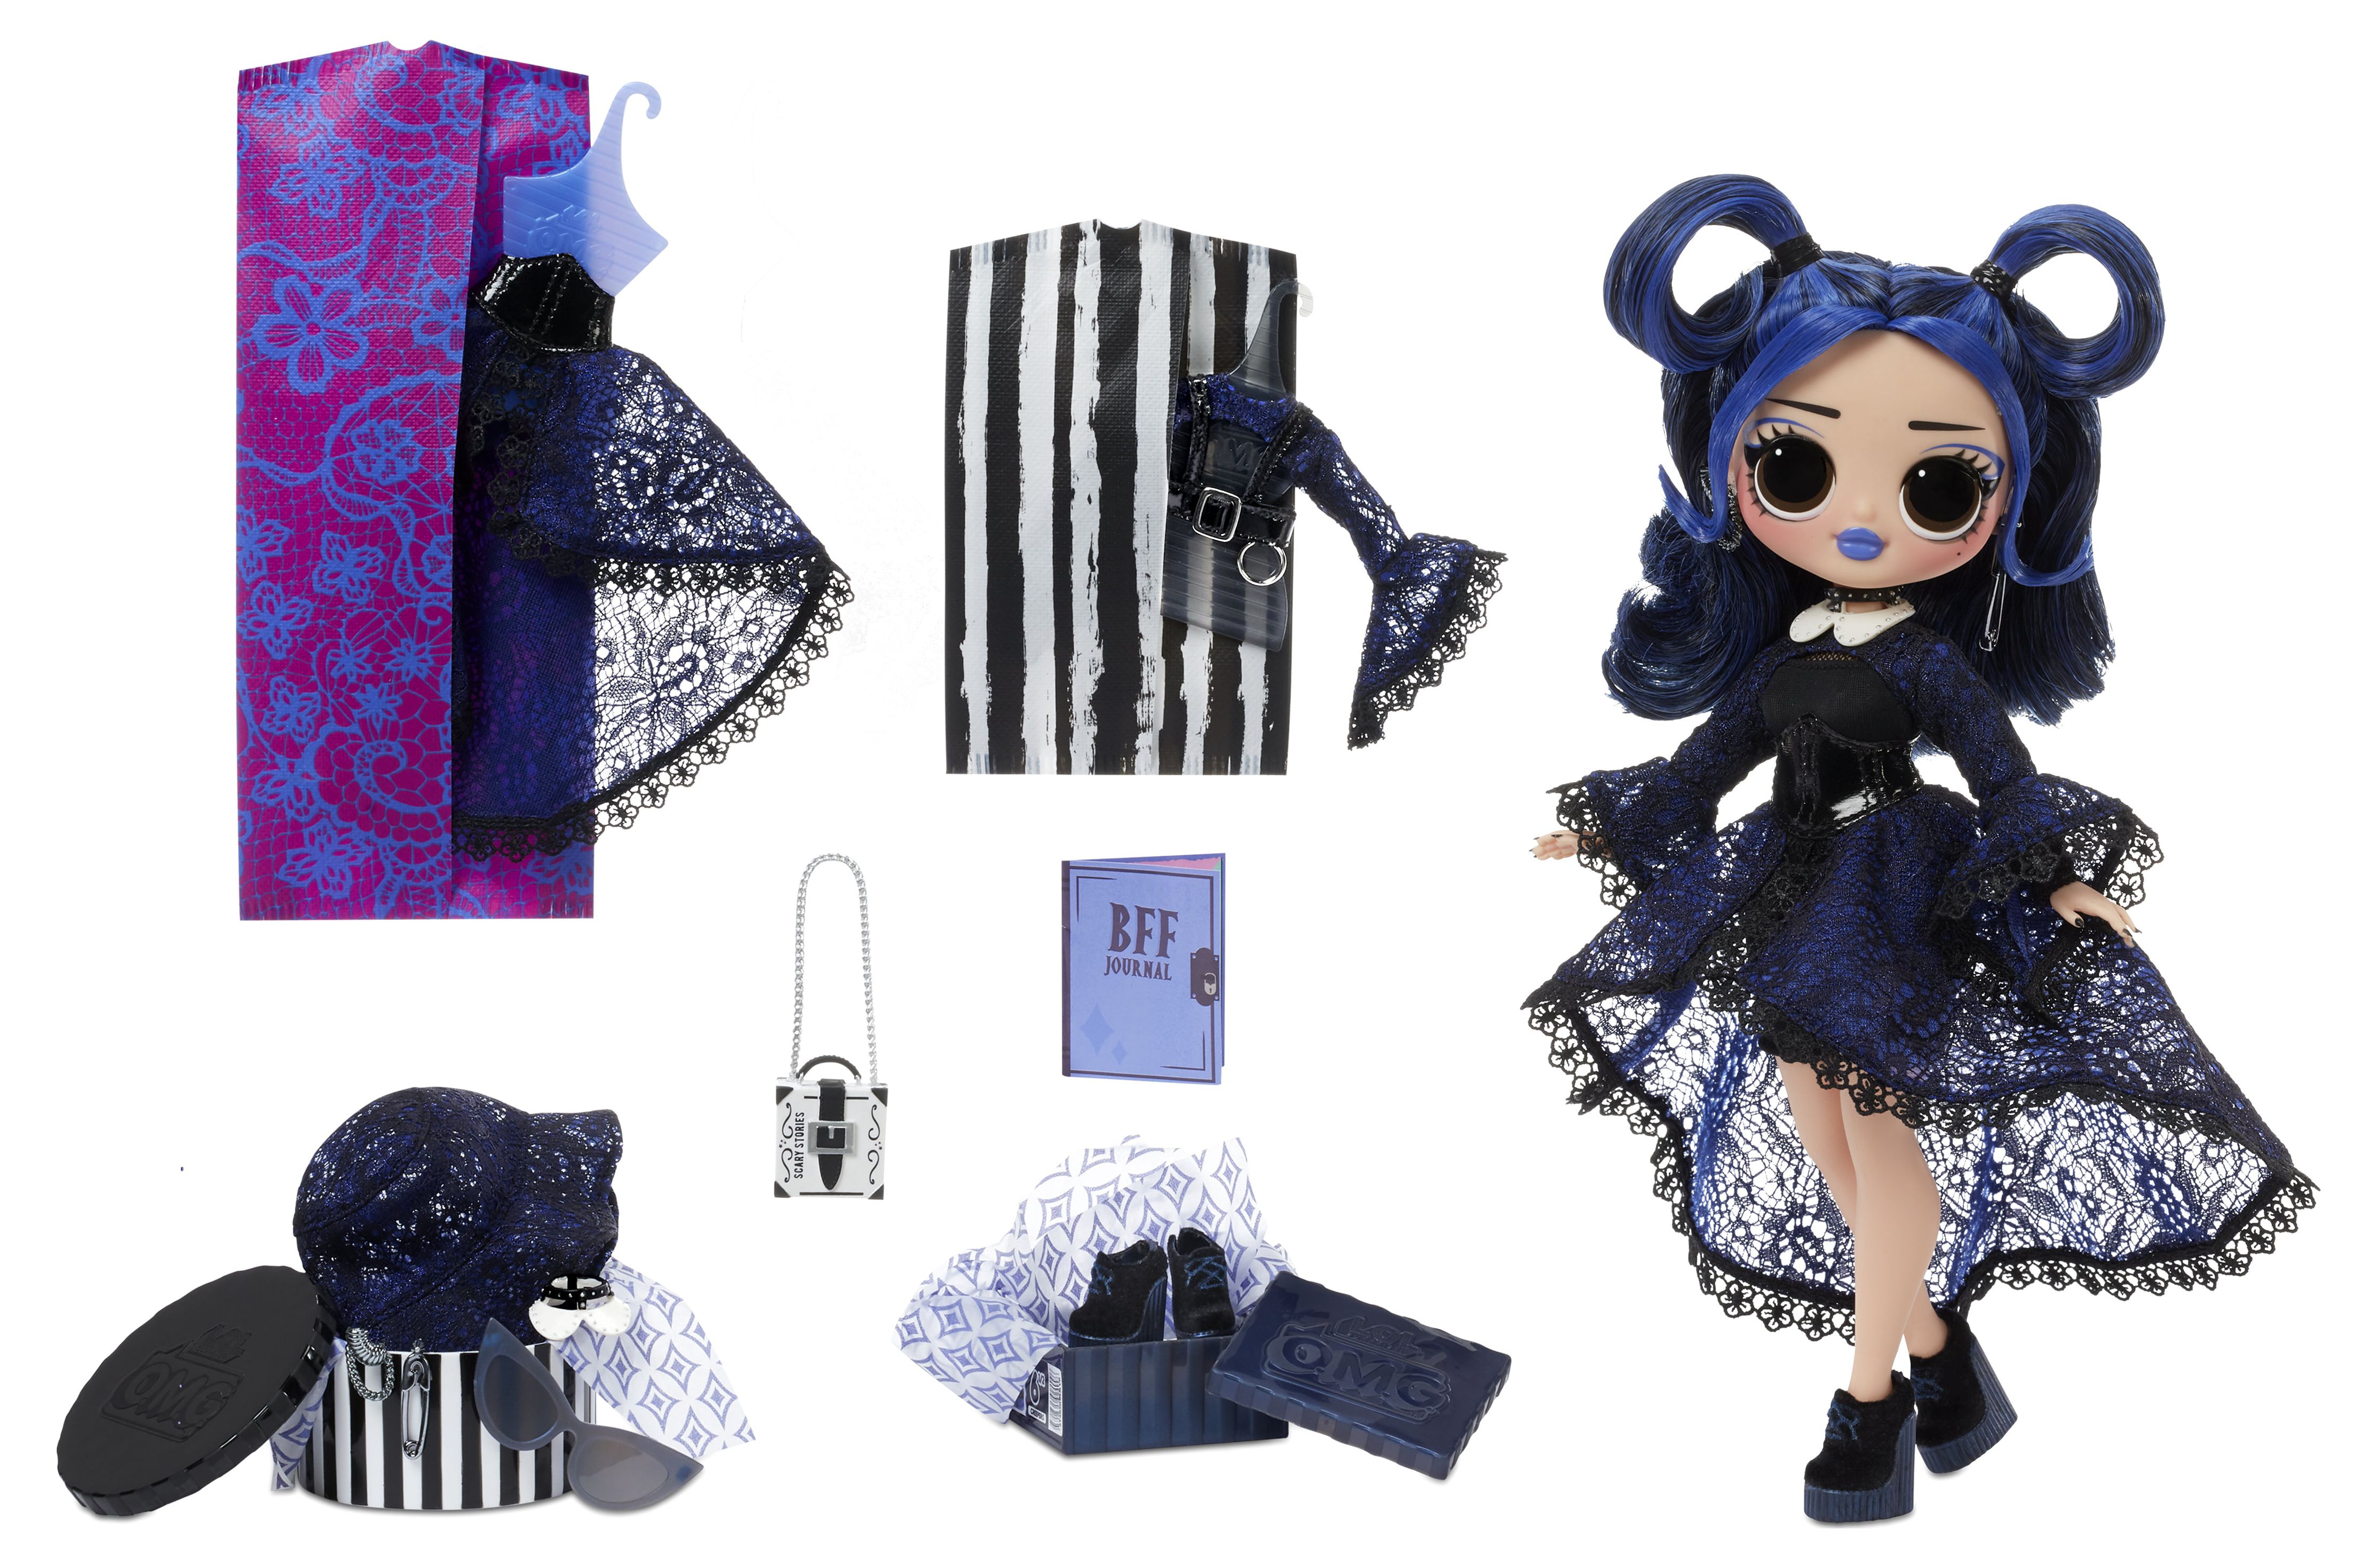 LOL Surprise Omg Moonlight B.B. Fashion Doll - Dress Up Doll Set With 20 Surprises for Girls And Kids 4+ - image 3 of 7